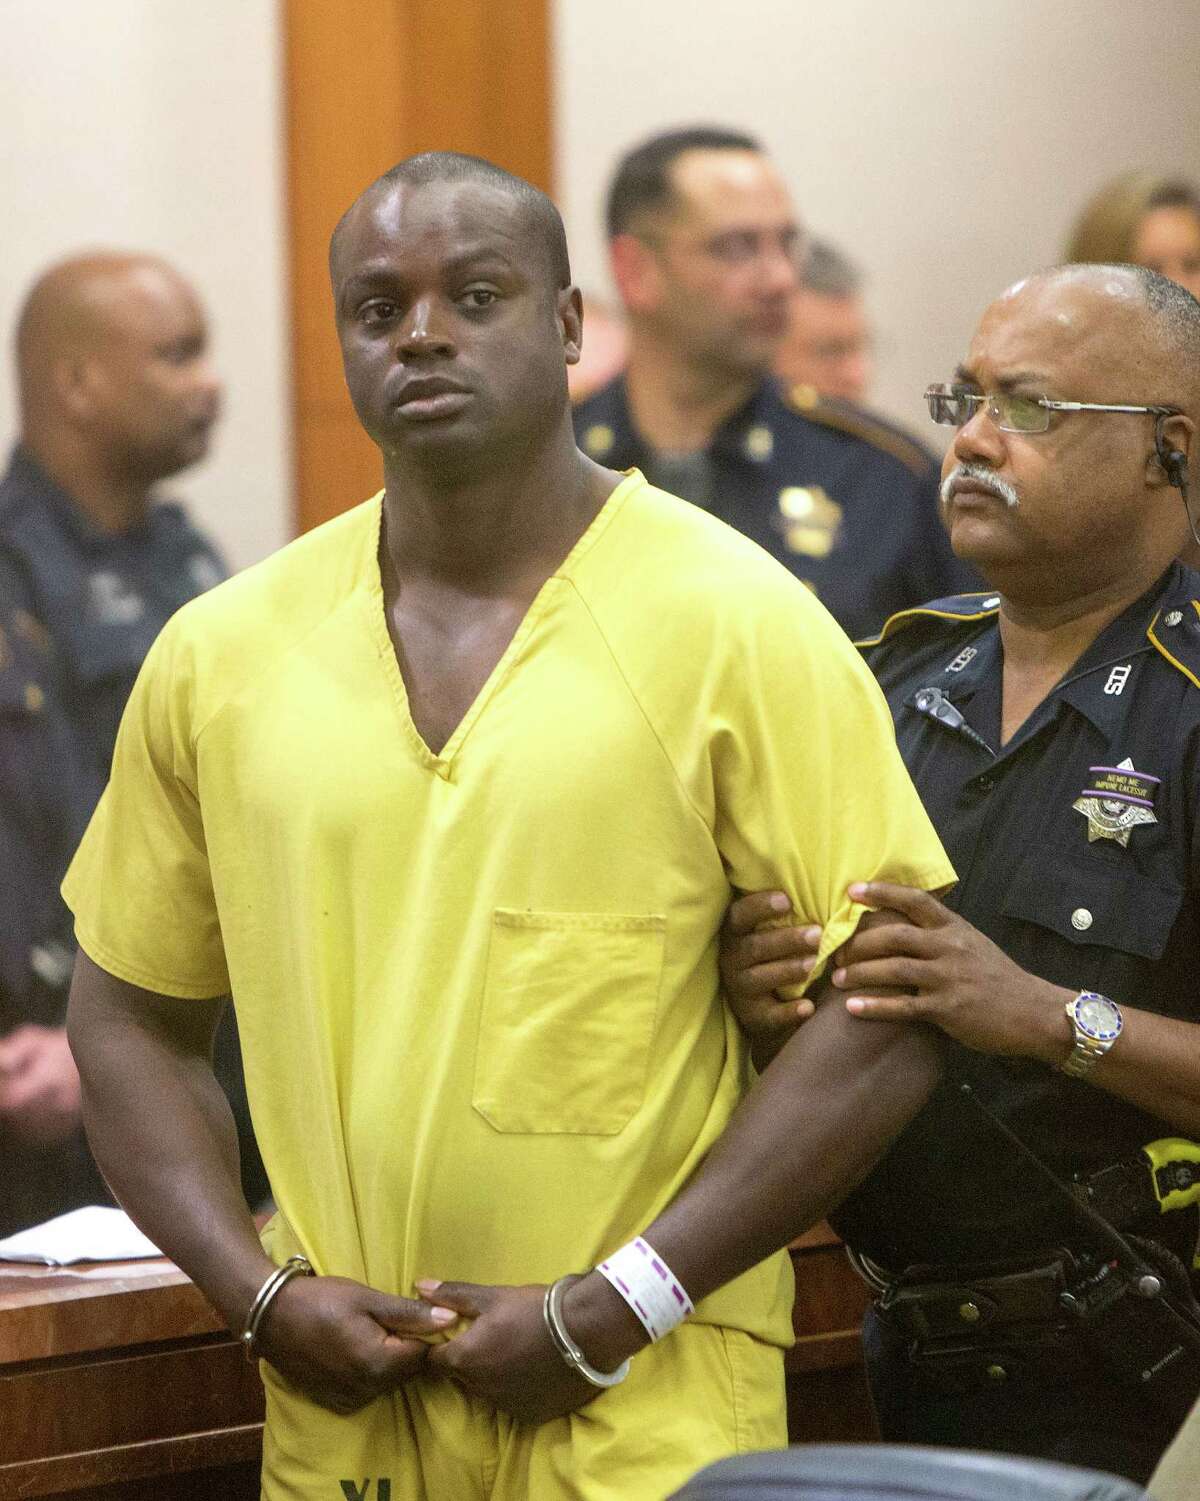 Shannon Miles appears in the 208th State District Court for his arraignment at the Harris County Criminal Courthouse, Monday, Aug. 31, 2015, in Houston. Harris County District Attorney Devon Anderson said Miles, 30, fatally shot Deputy Darren Goforth after he refueled his police cruiser at a gas station. "They found Deputy Darren Goforth face down in a pool of his own blood," Harris County District Attorney Devon Anderson told state District Judge Denise Collins.